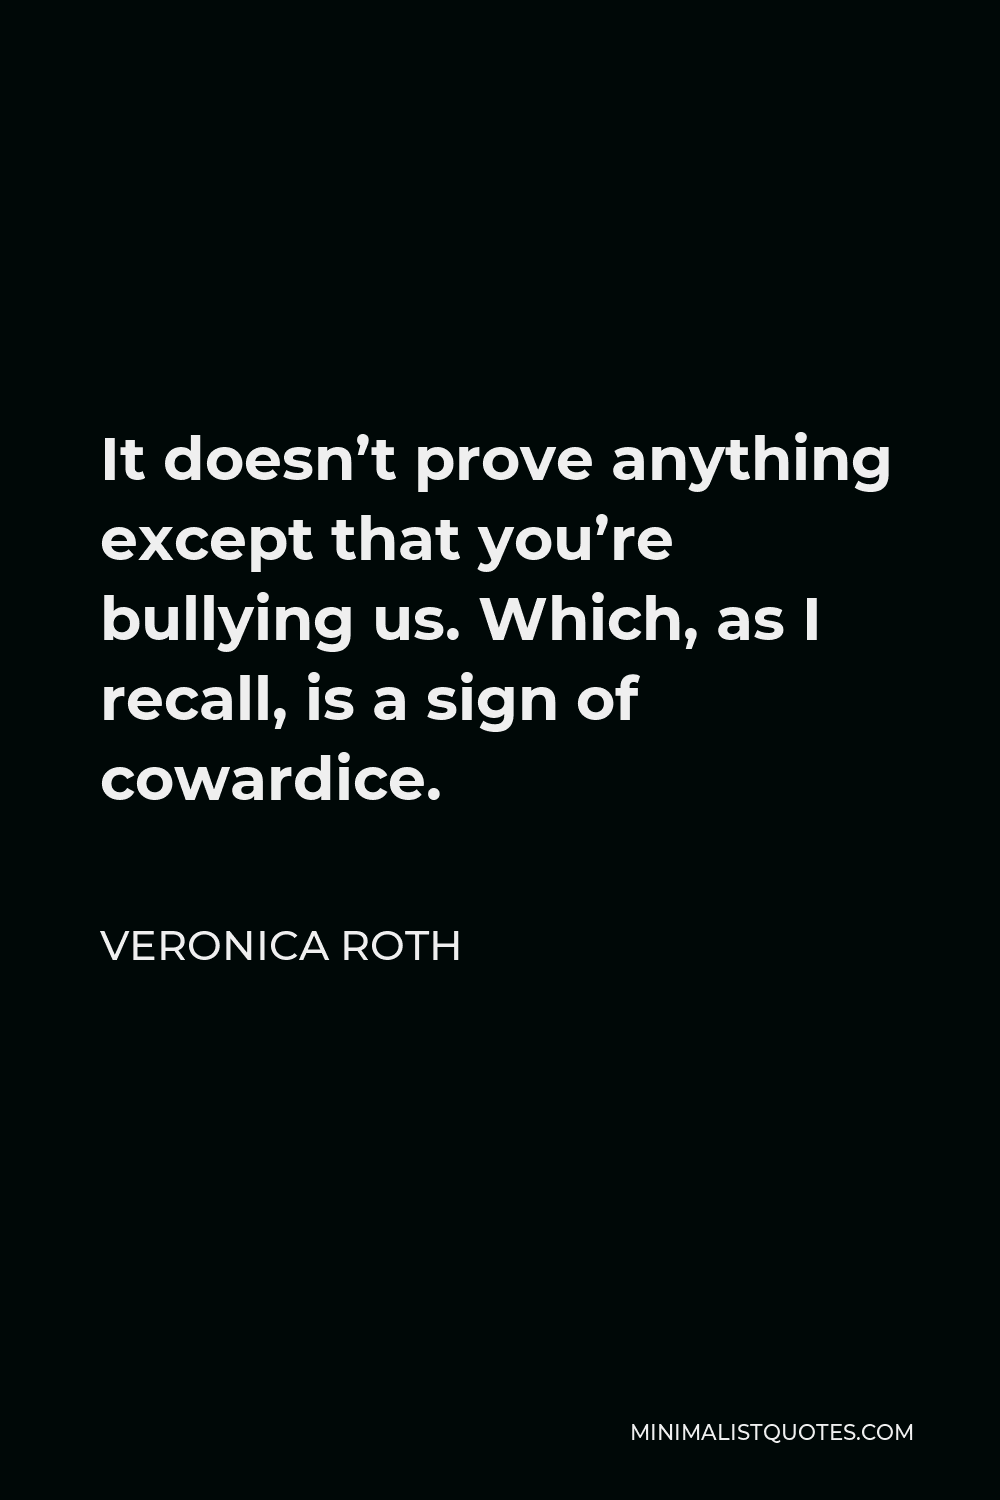 Veronica Roth Quote - It doesn’t prove anything except that you’re bullying us. Which, as I recall, is a sign of cowardice.